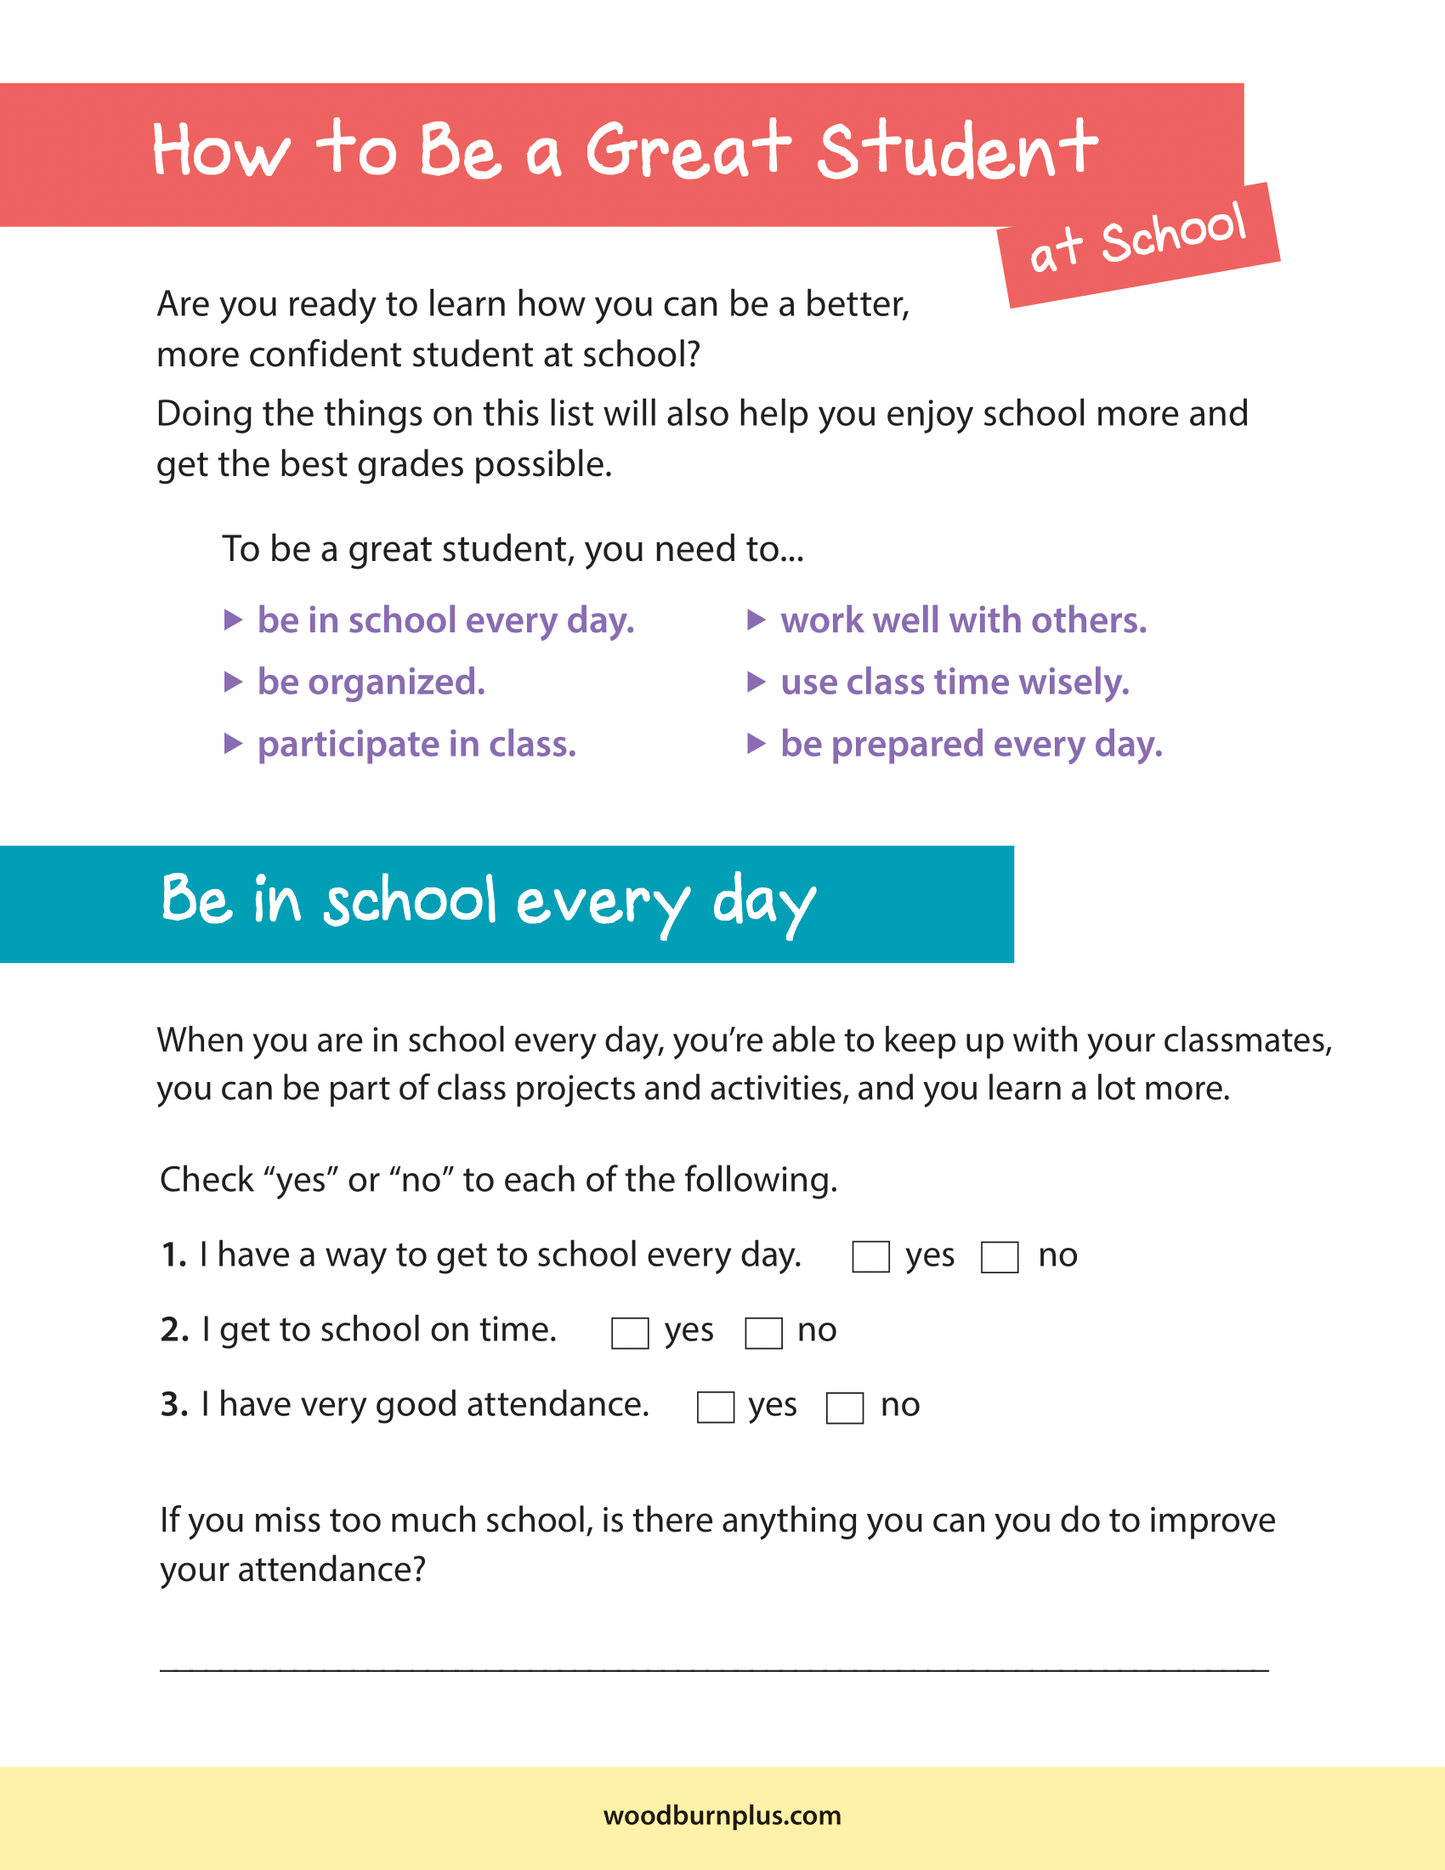 How to Be a Great Student at School - Be in School Every Day